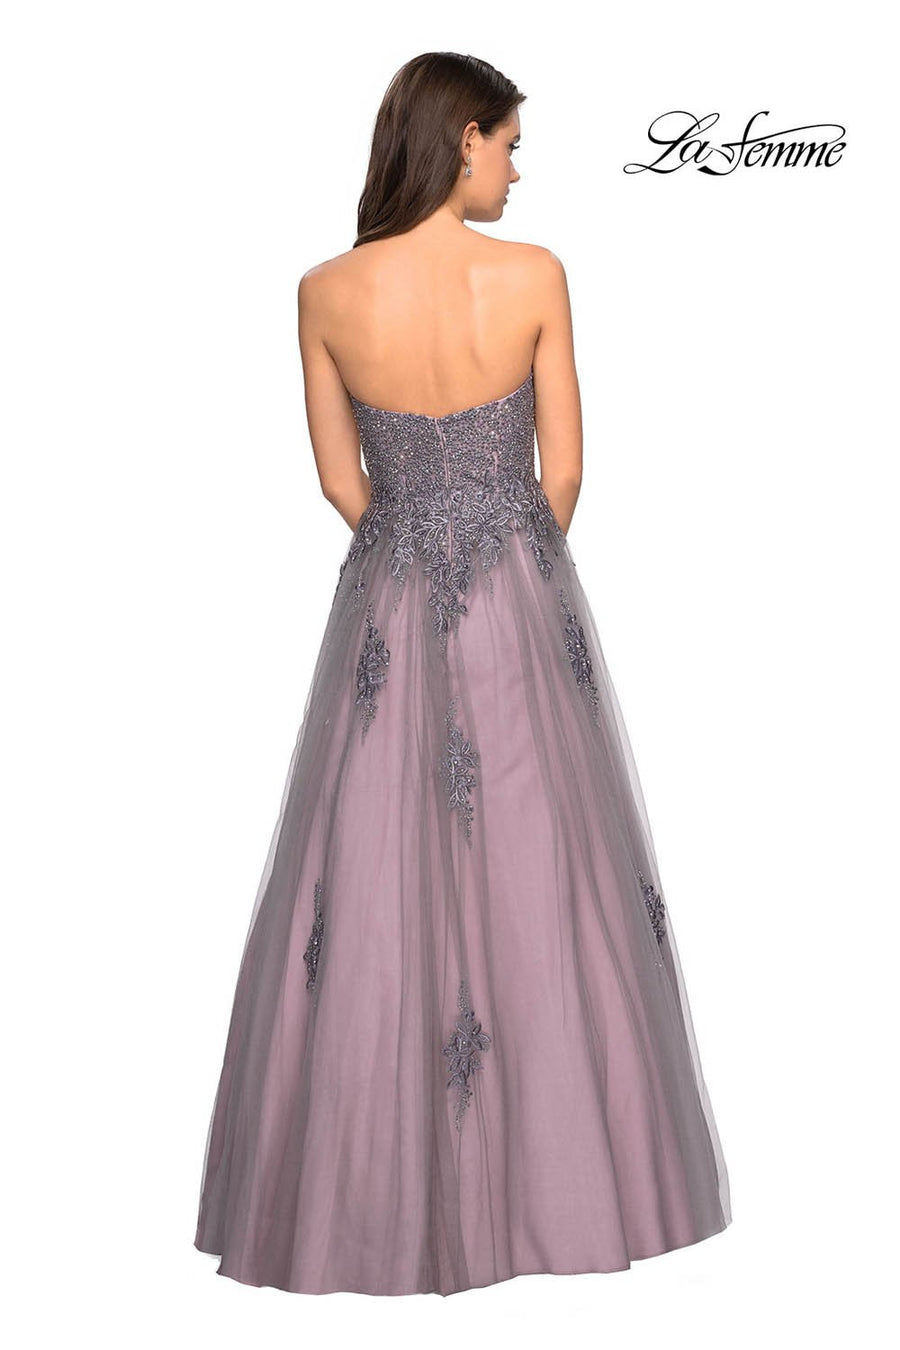 Gigi by La Femme 27767 prom dress images.  Gigi by La Femme 27767 is available in these colors: Grey Pink.